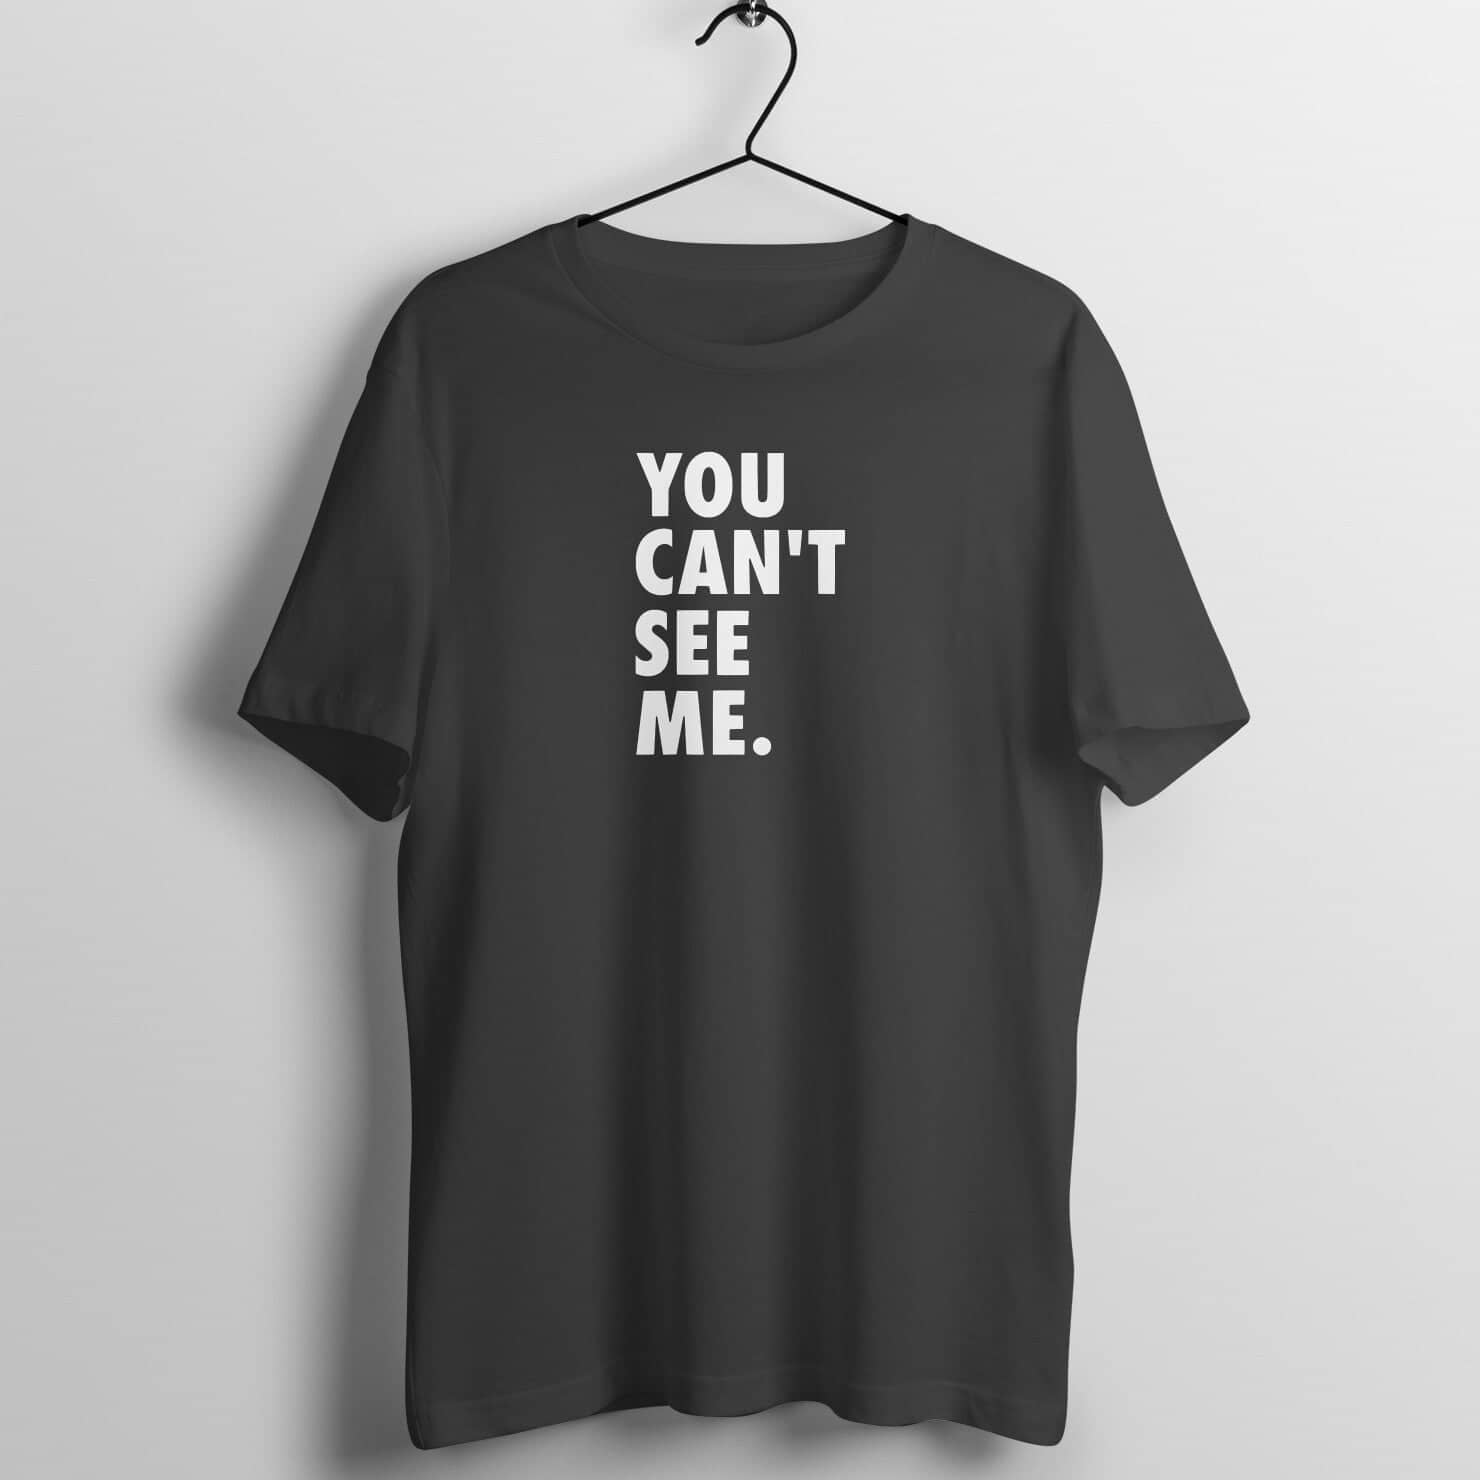 You Can't See Me Exclusive Black T Shirt for Men and Women freeshipping - Catch My Drift India